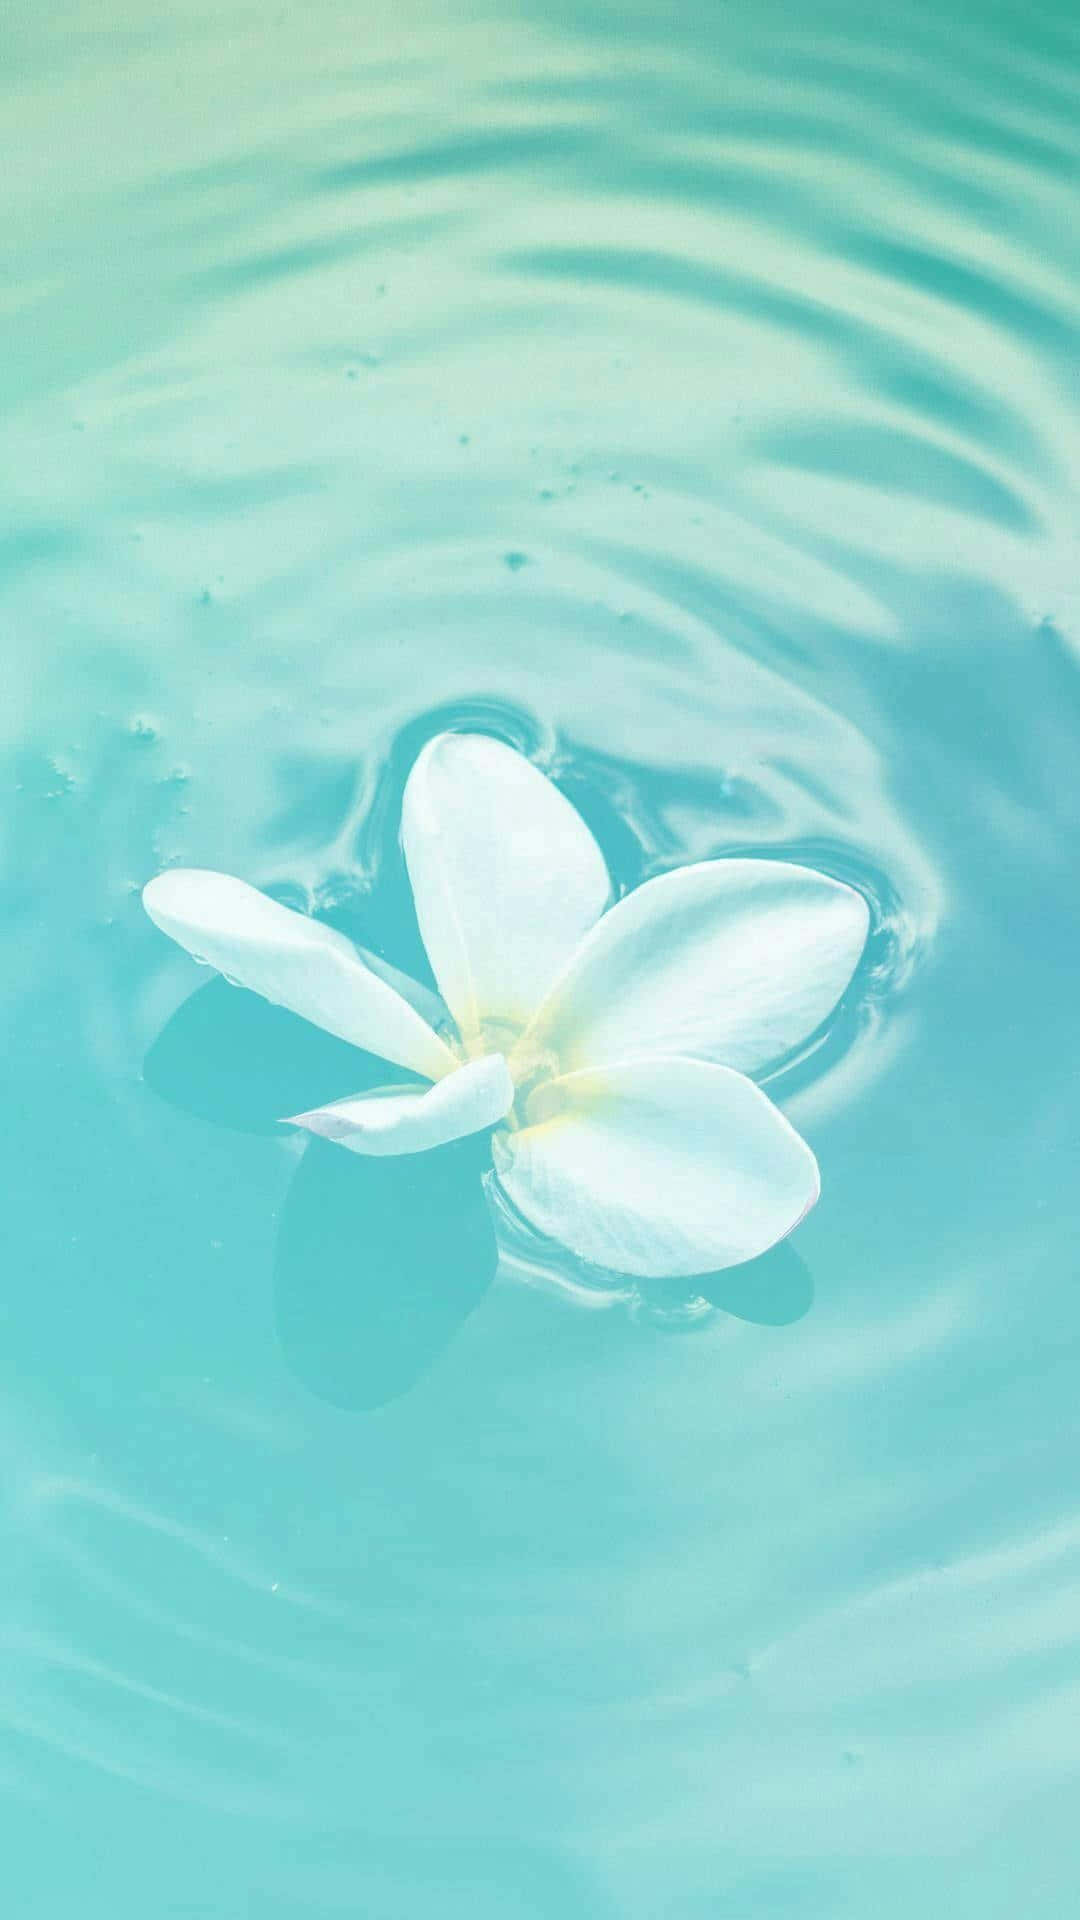 Pastel Teal Waterwith White Flower Wallpaper